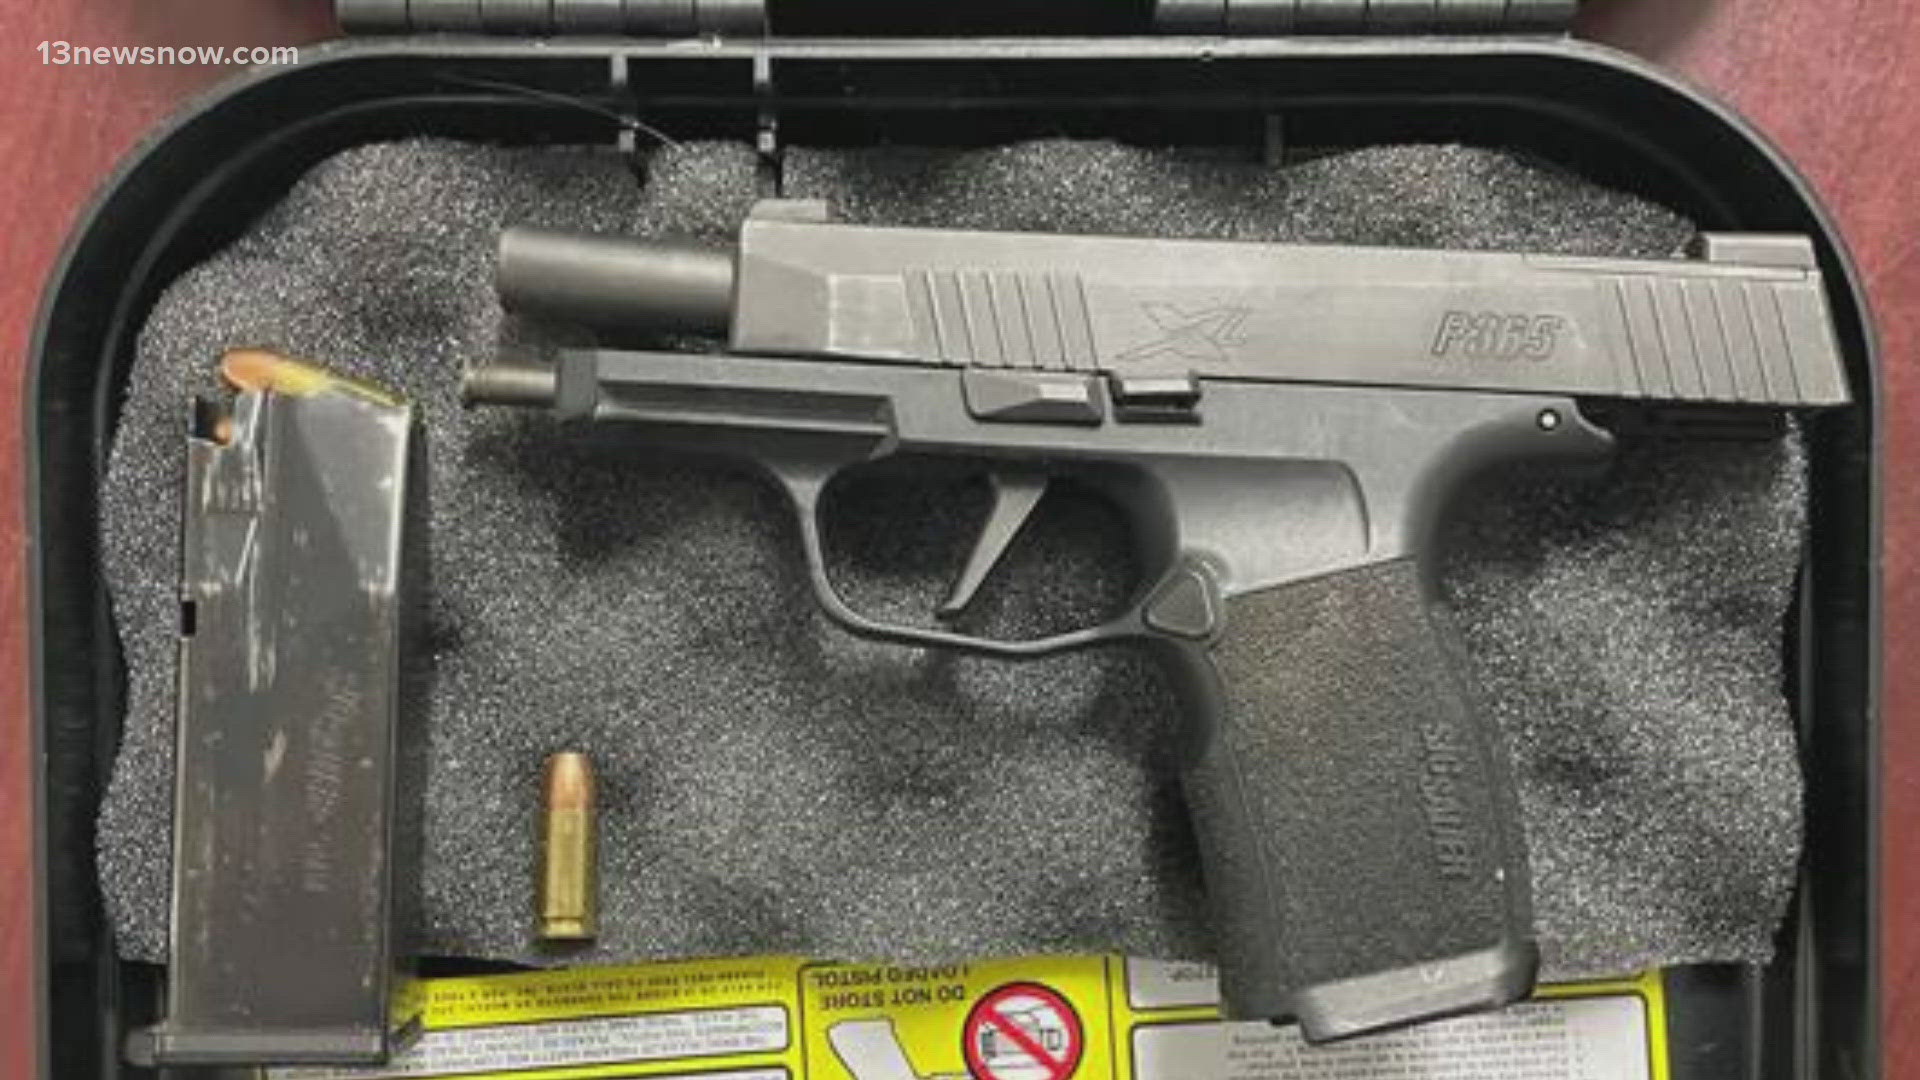 The TSA says the gun was loaded with 13 bullets, including one in the chamber.